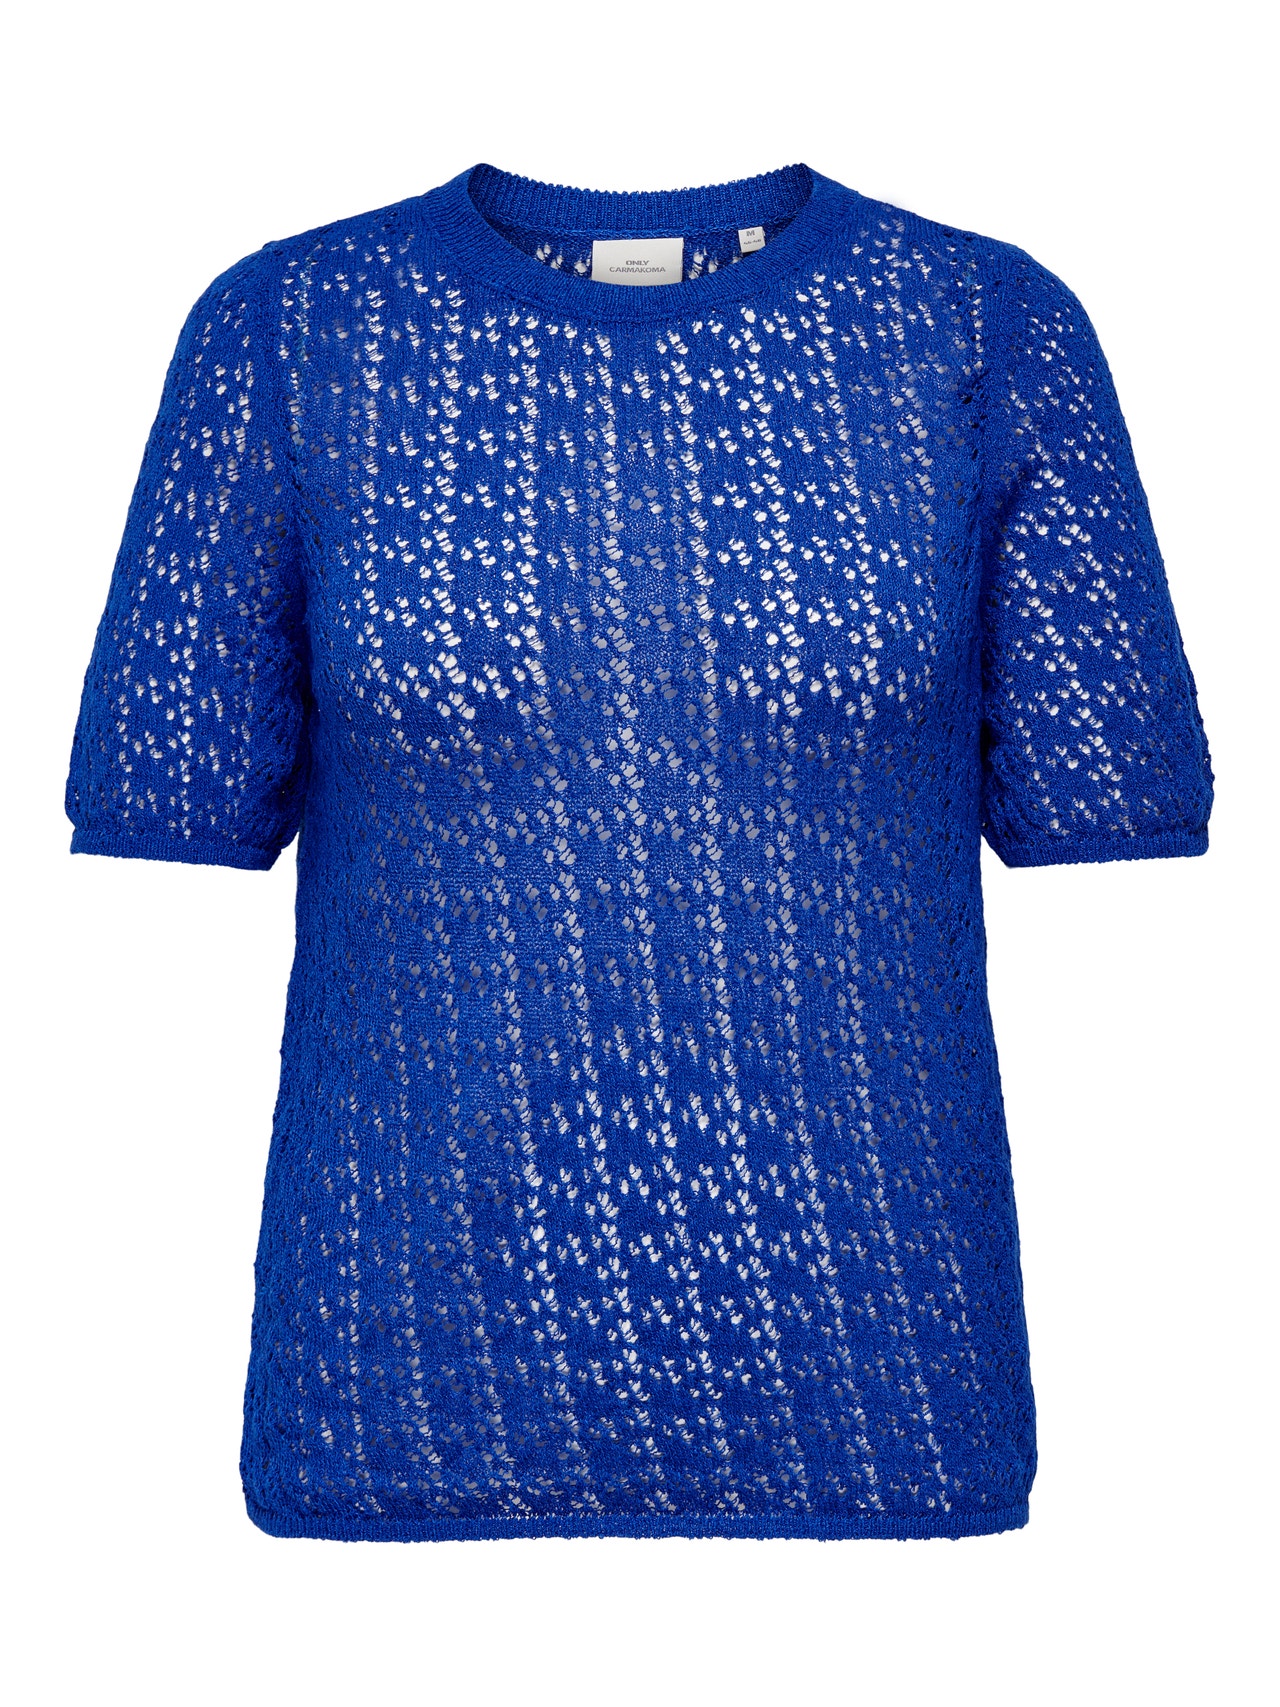 ONLY Curvy o-neck knitted top -Dazzling Blue - 15323298